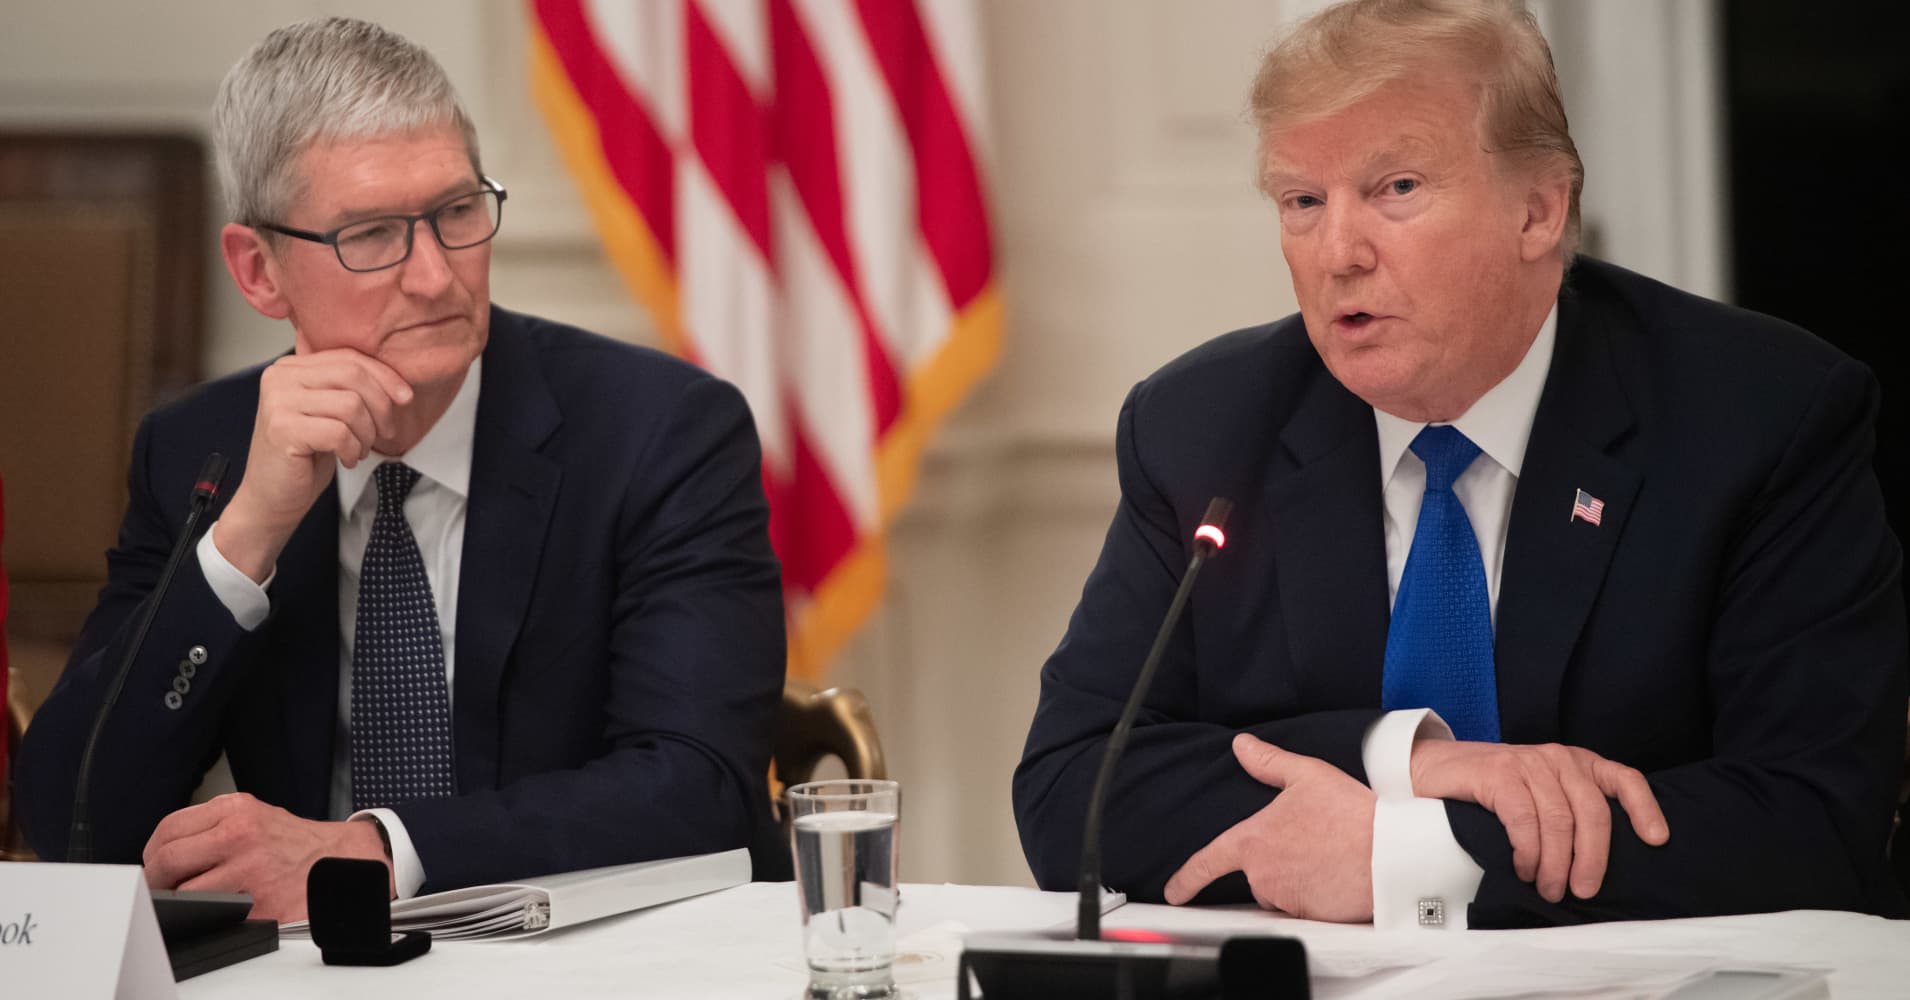 Trump says he called Apple's CEO 'Tim Apple' to save time, reportedly told donors he never said it